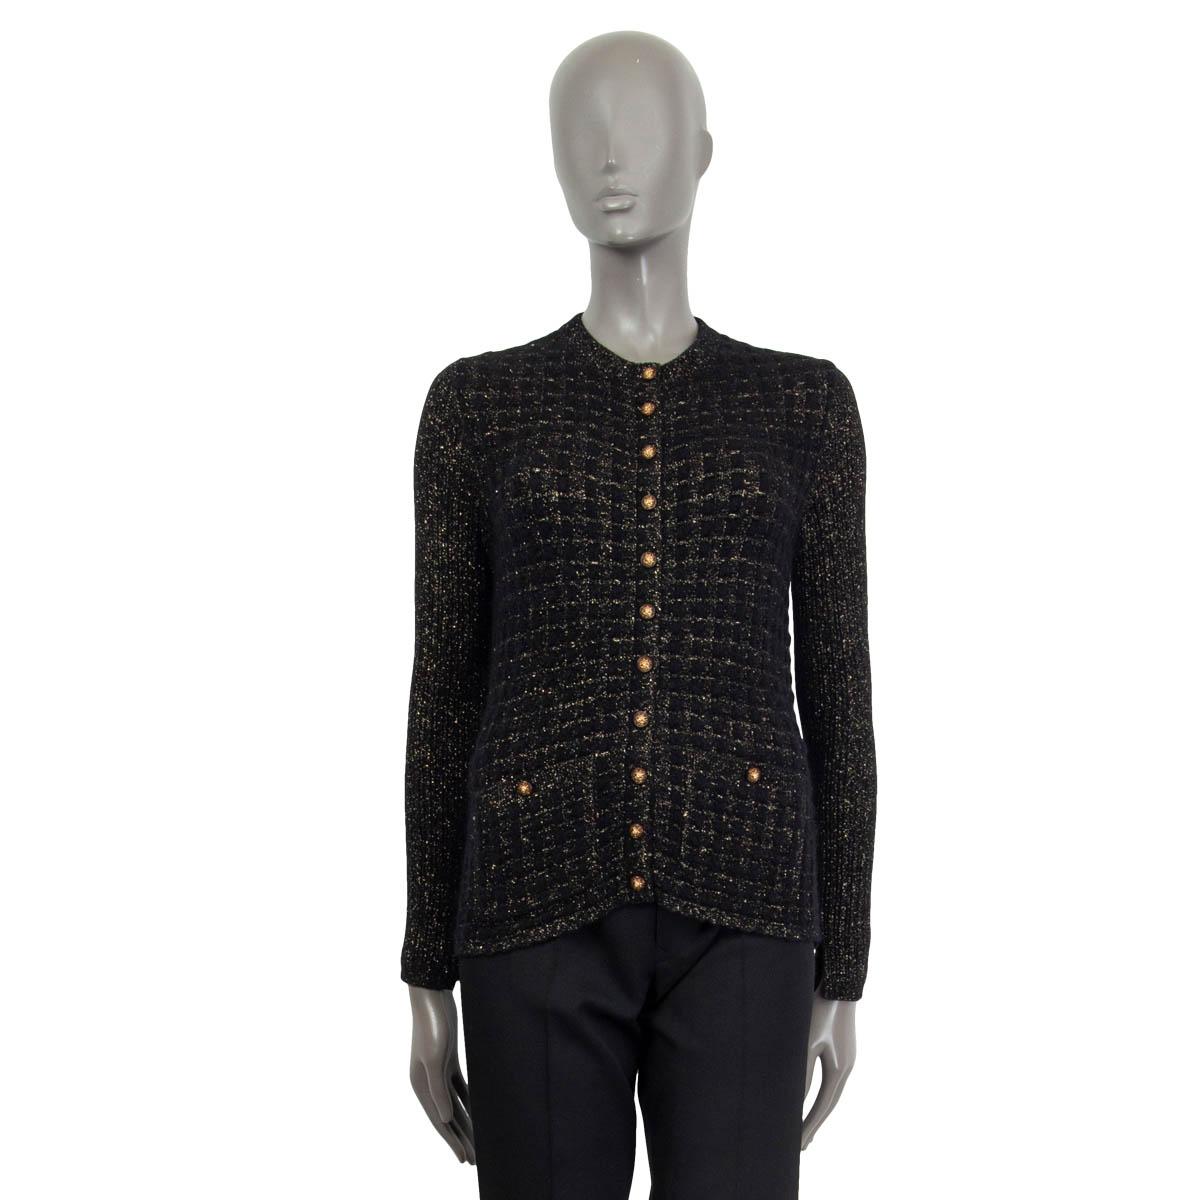 Chanel cardigan suit 1926. Her three-piece cardigan suit consists